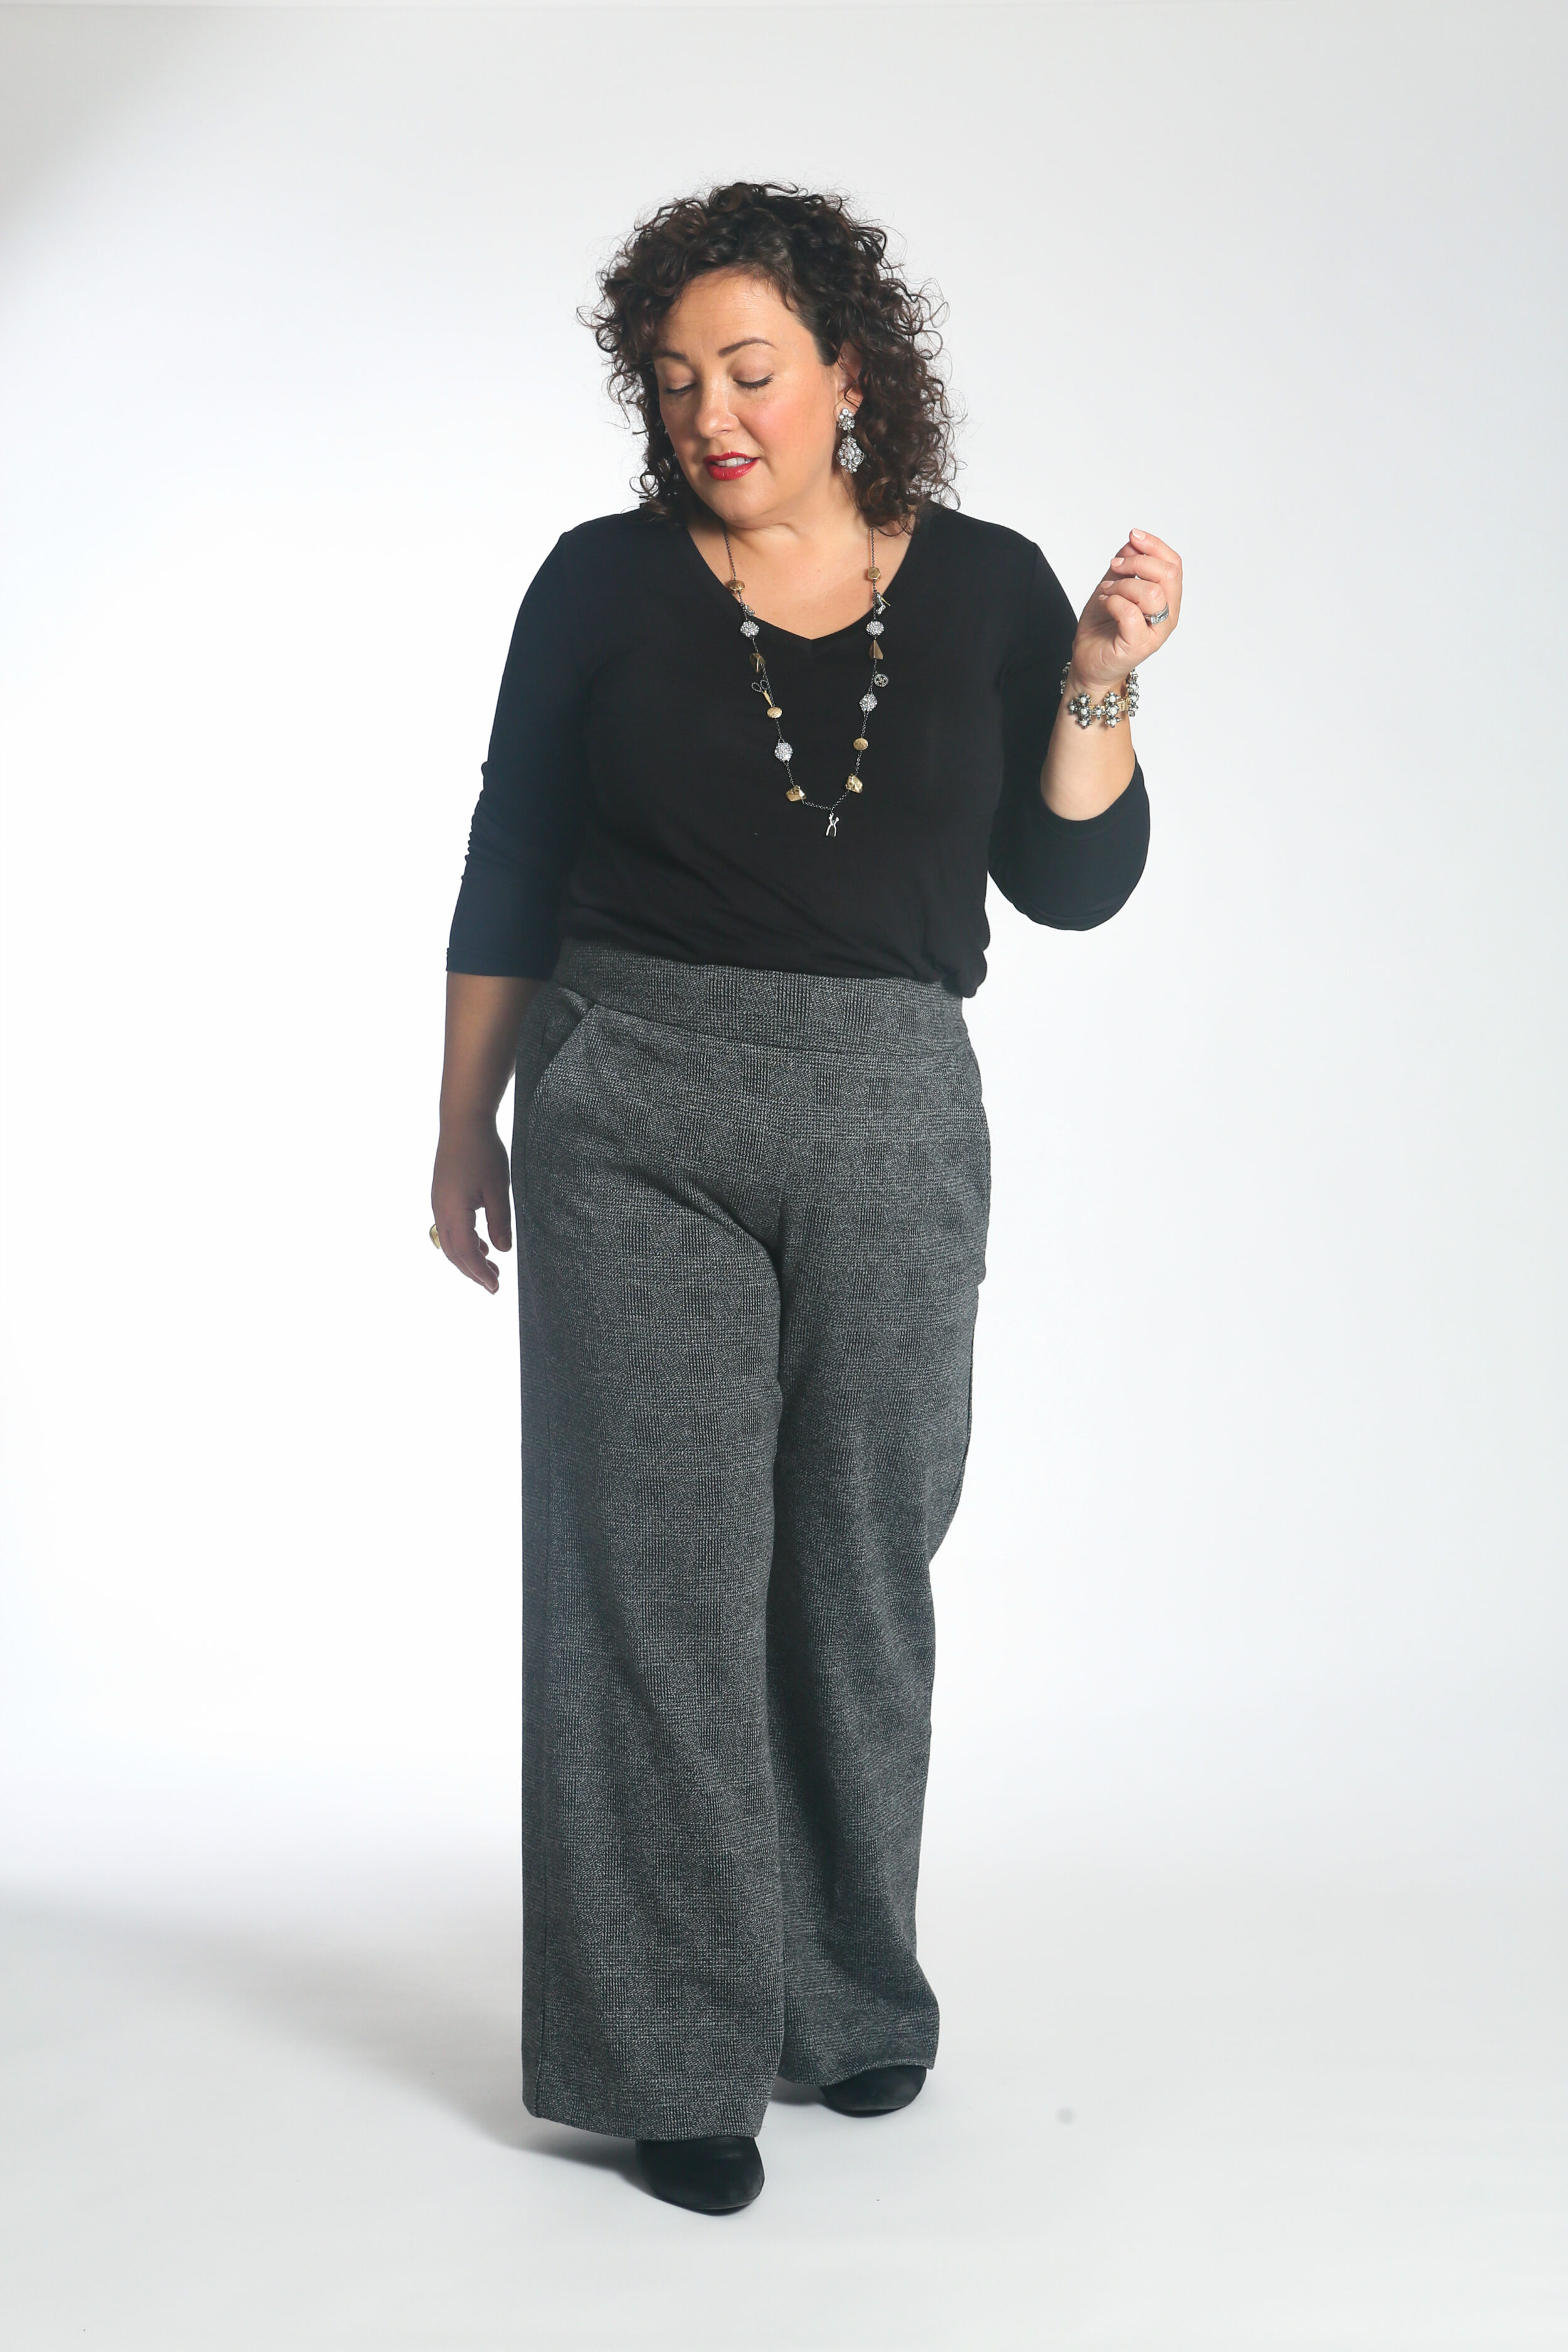 Wardrobe Oxygen in the cabi Reveal Tee tucked into the Bond Trouser